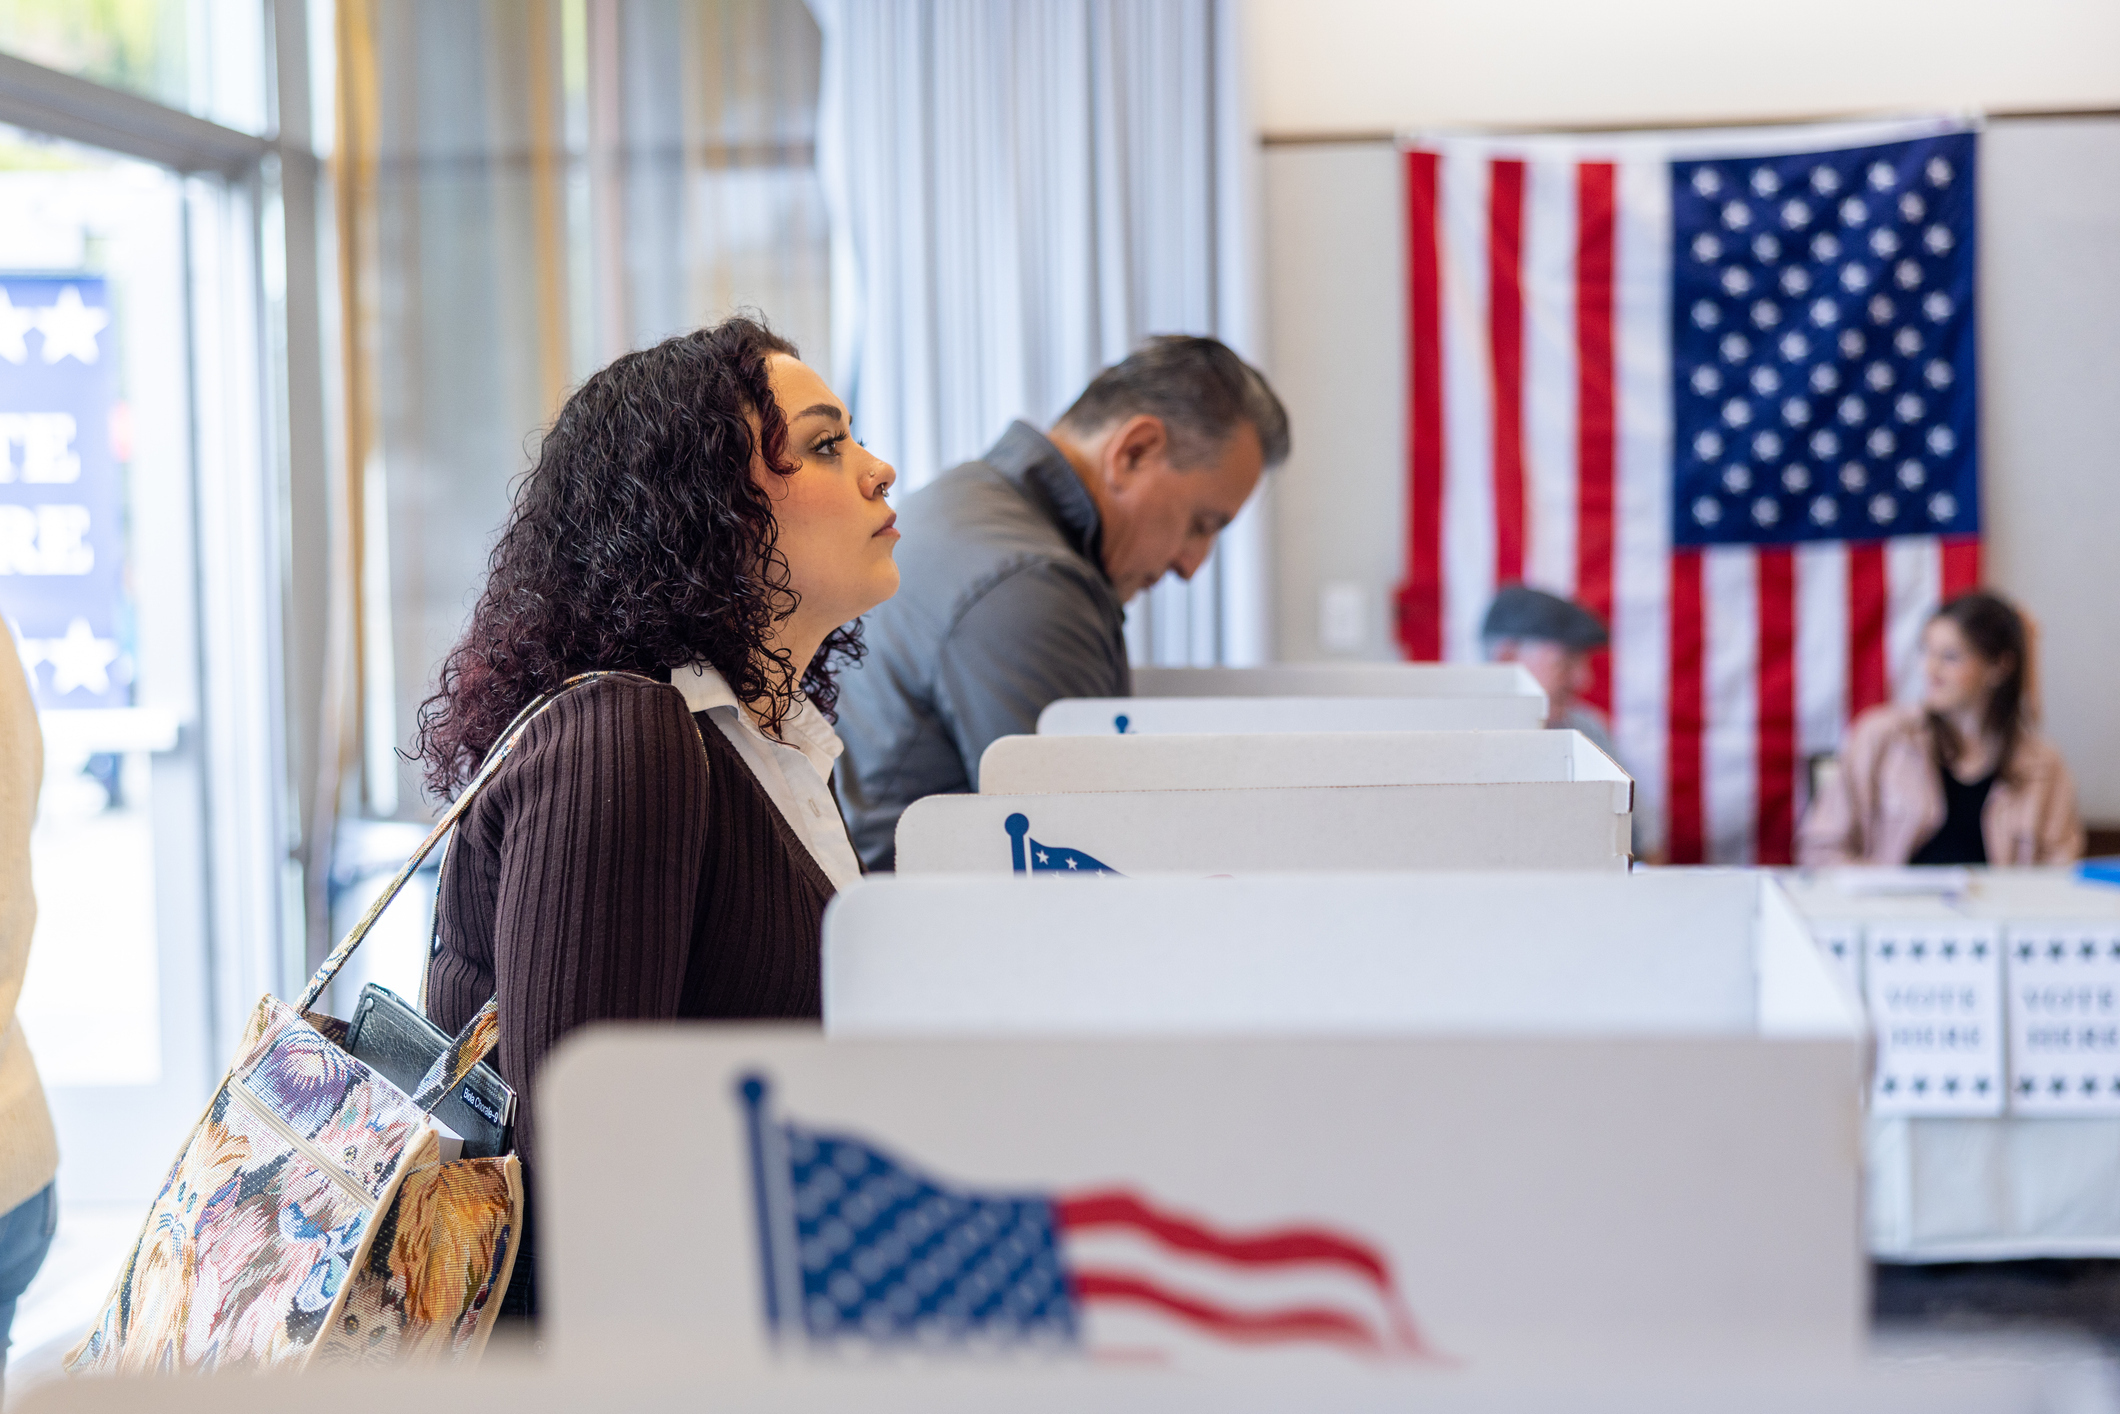 Americans voting in an election stock photo